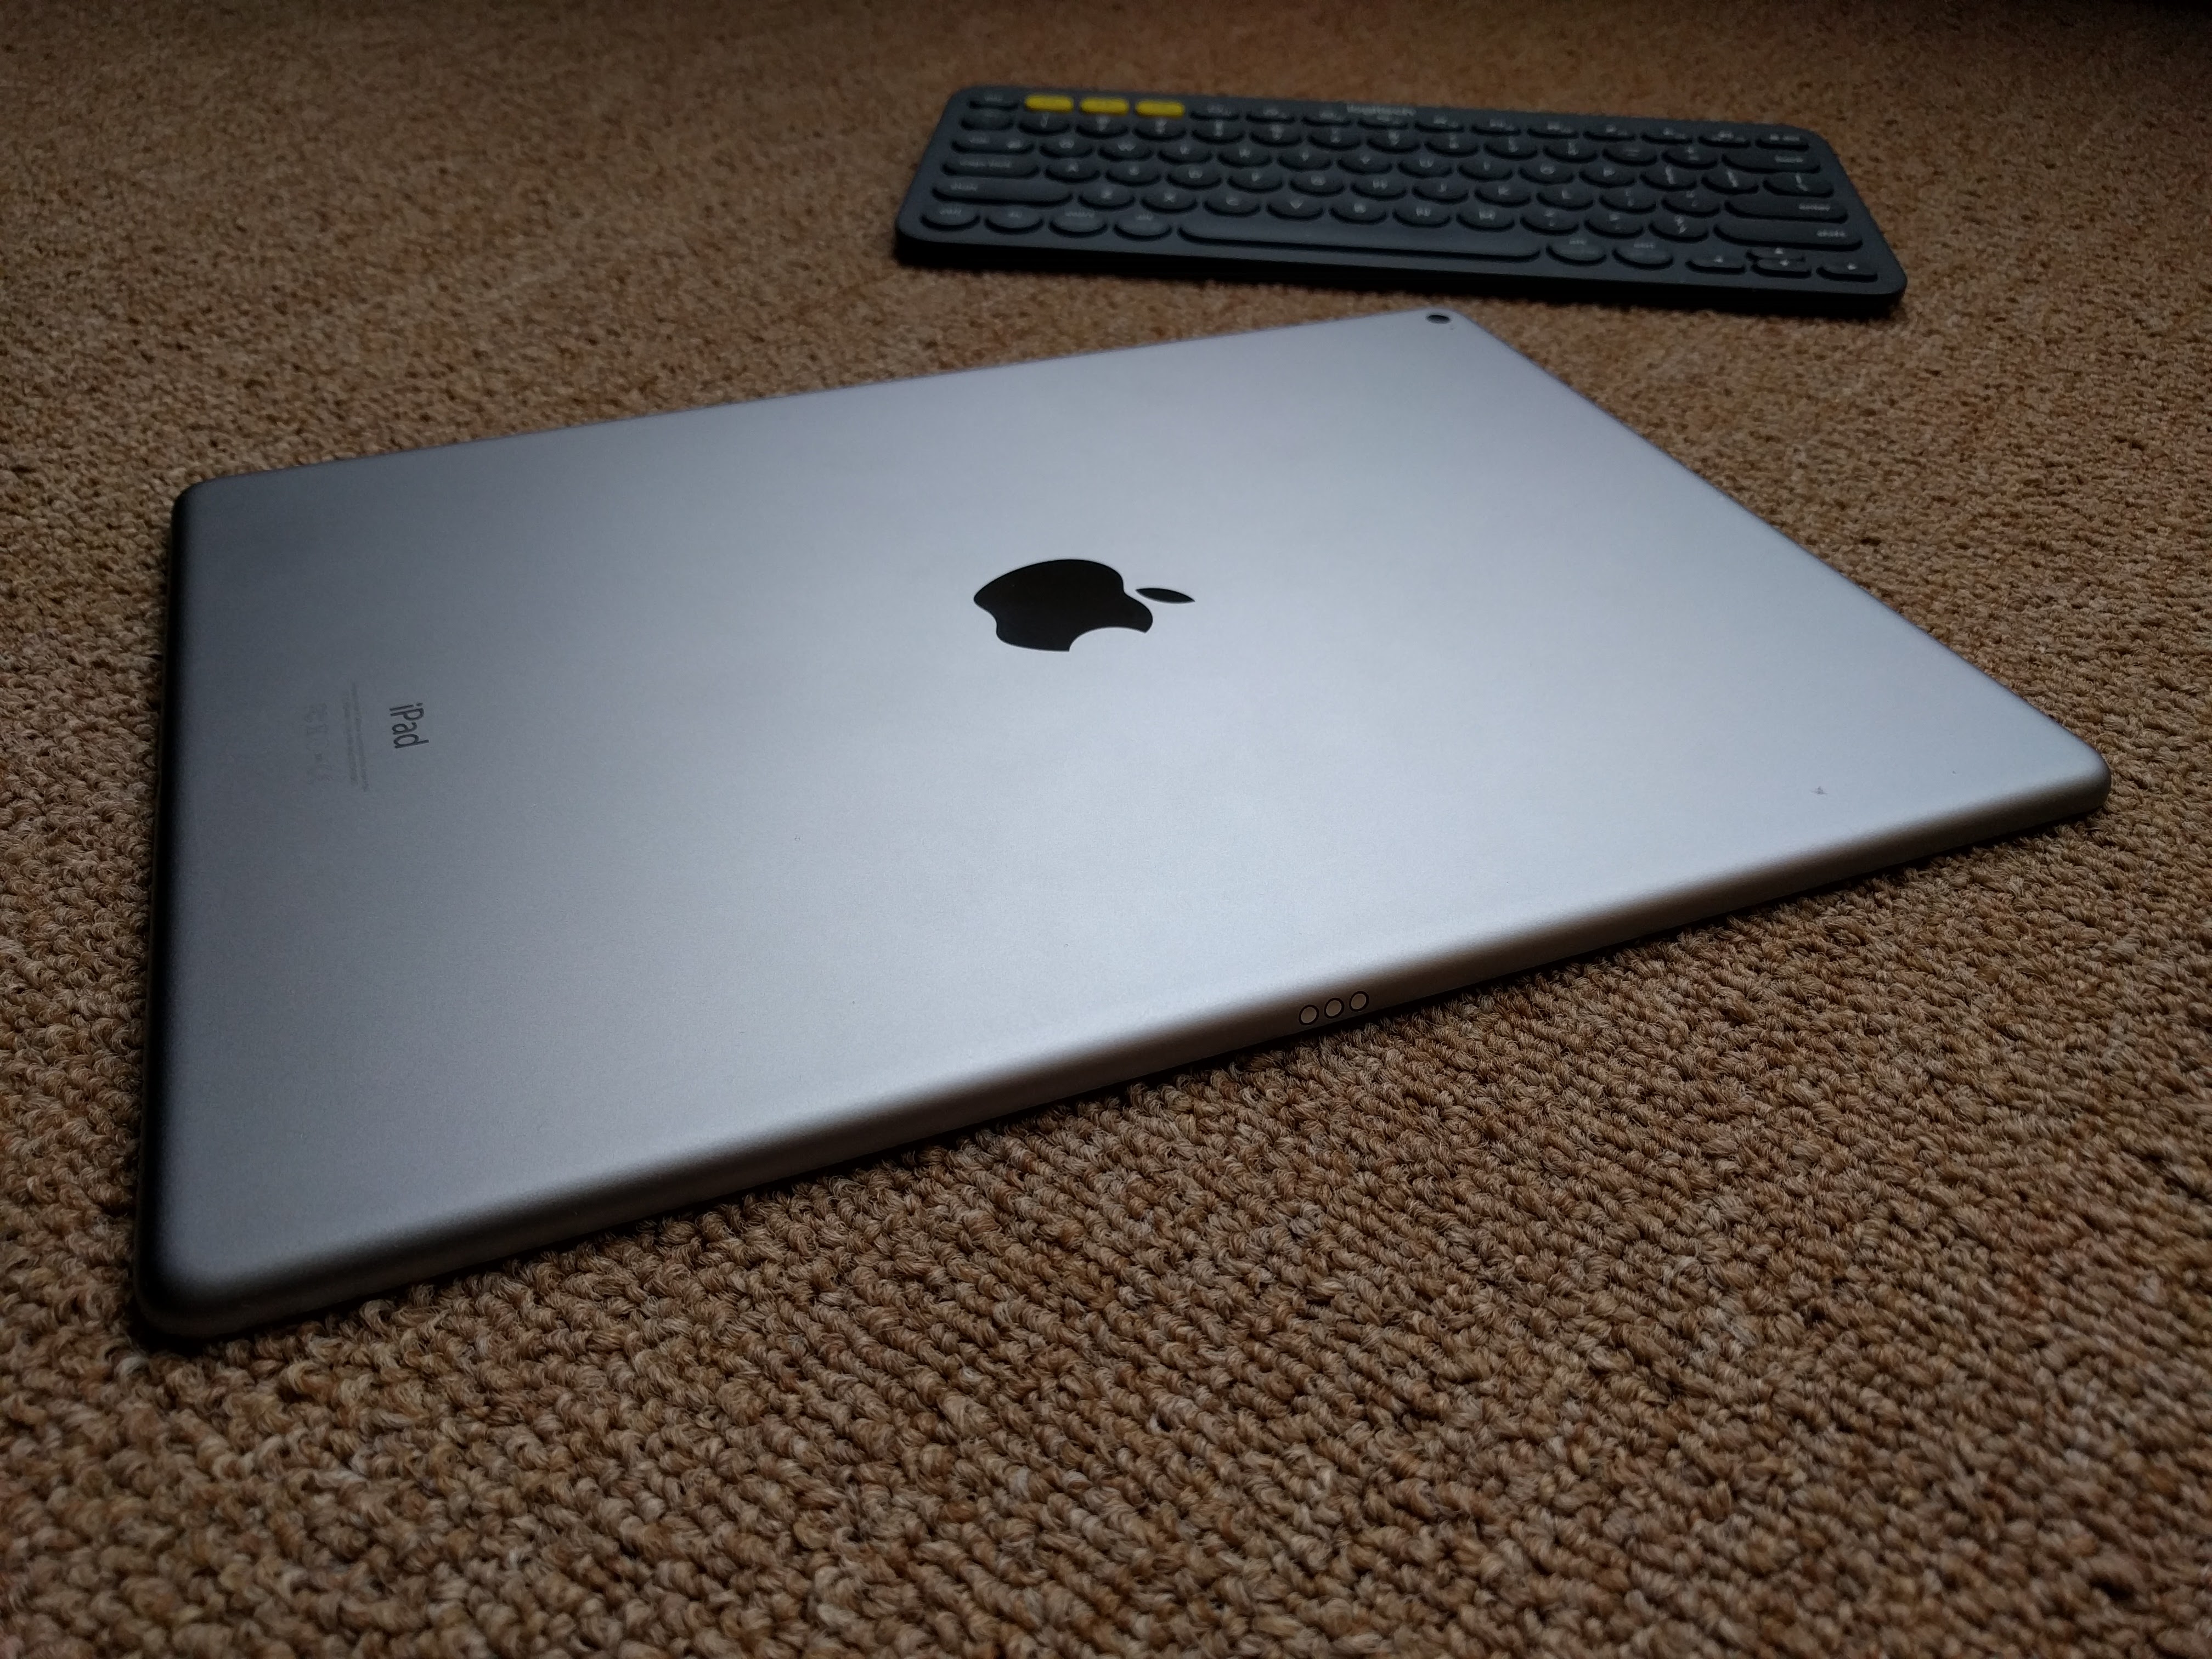 The back of the iPad Pro in the foreground. In the background is the Logitech K380 Bluetooth keyboard, which I've been using with the iPad Pro.